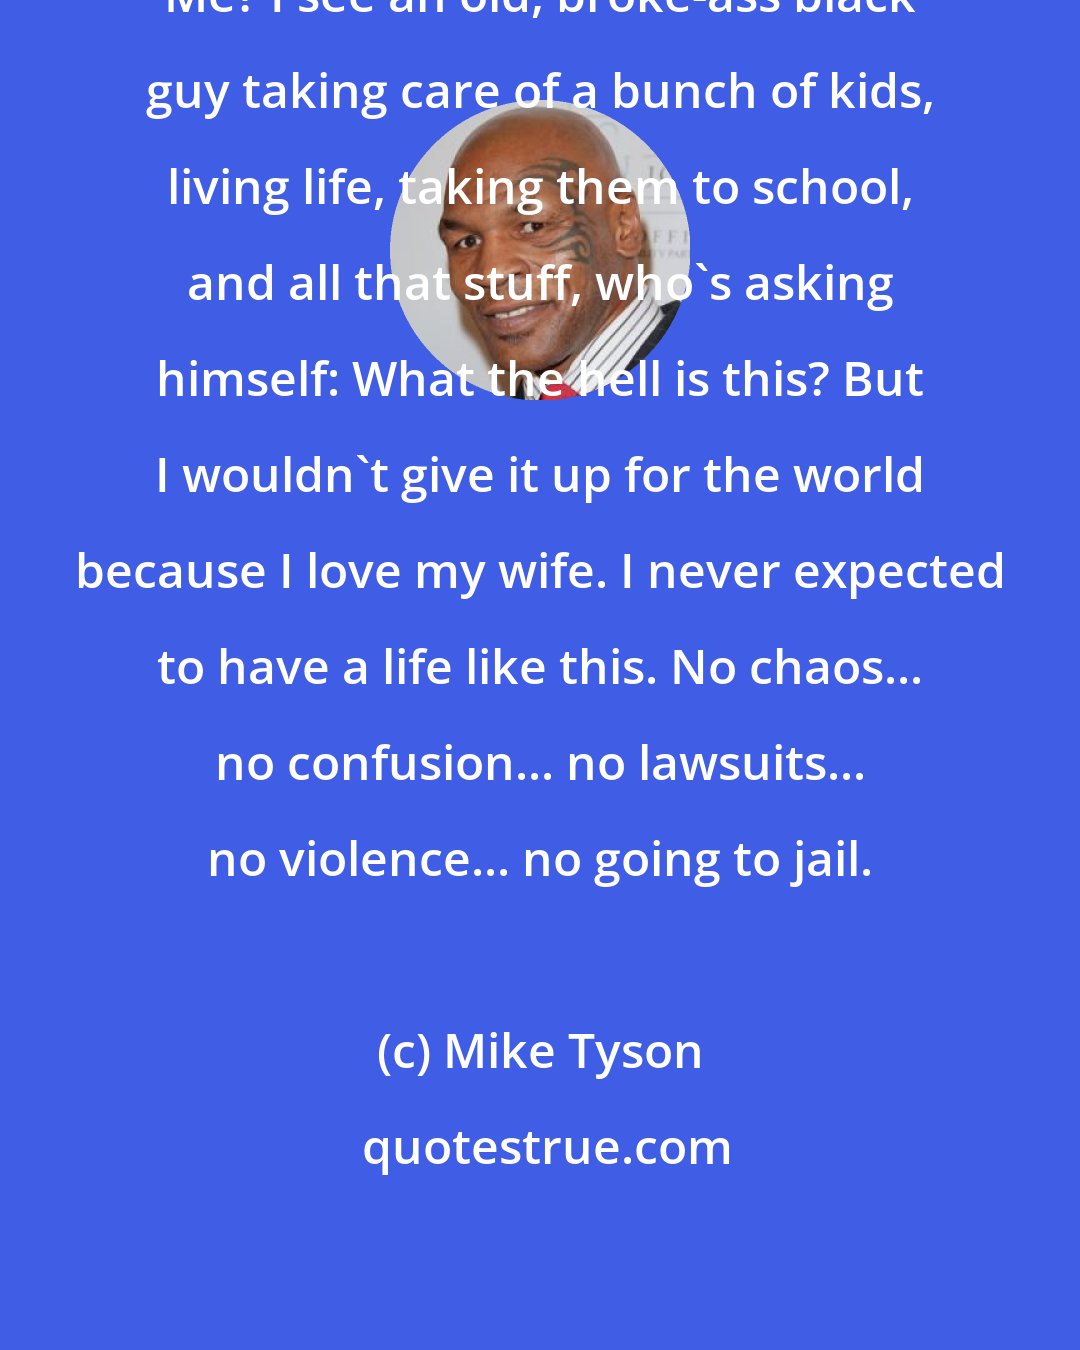 Mike Tyson: Me? I see an old, broke-ass black guy taking care of a bunch of kids, living life, taking them to school, and all that stuff, who's asking himself: What the hell is this? But I wouldn't give it up for the world because I love my wife. I never expected to have a life like this. No chaos... no confusion... no lawsuits... no violence... no going to jail.